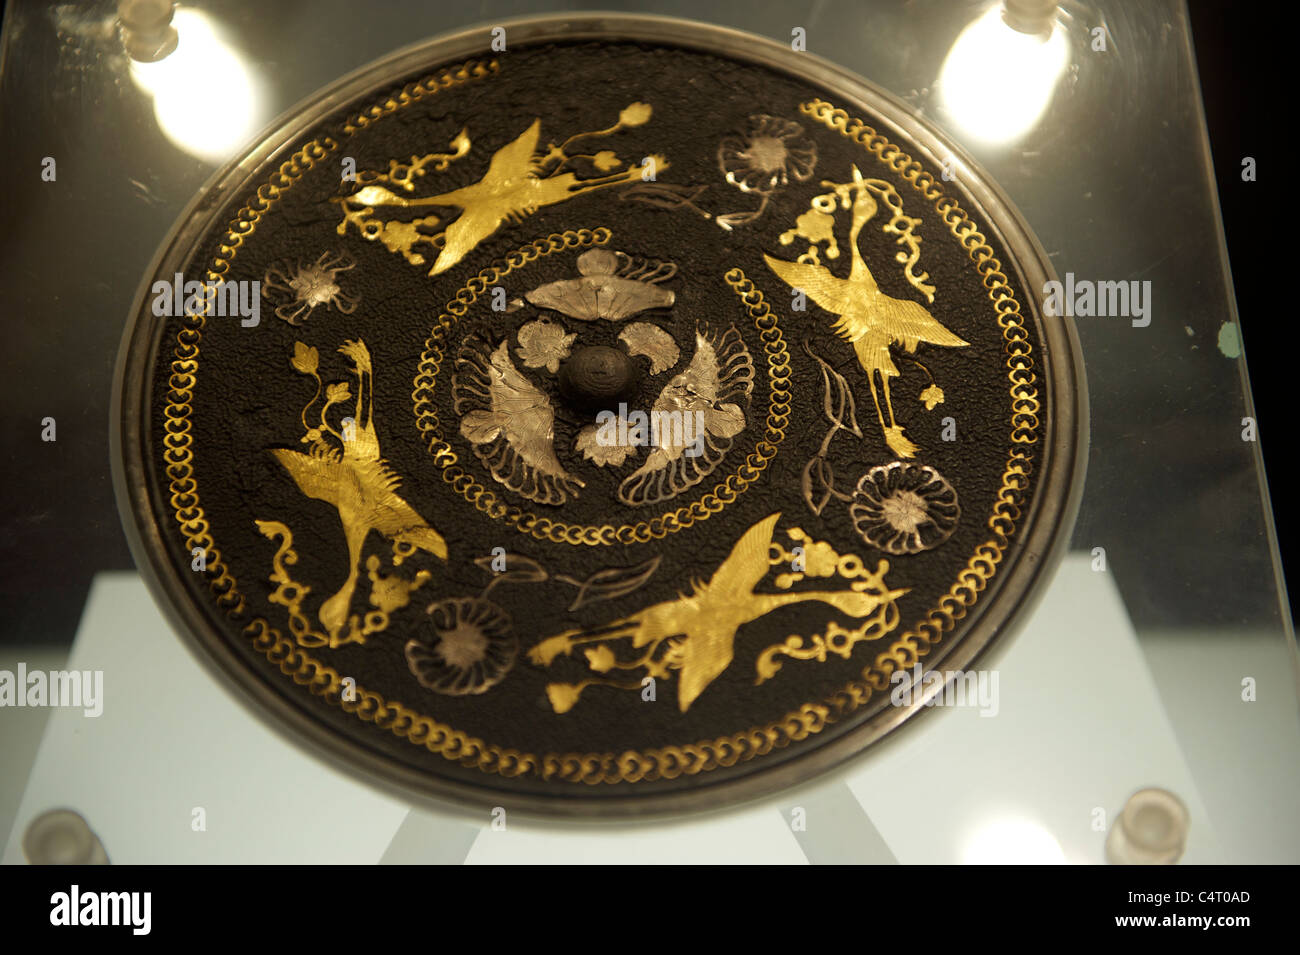 Mirror with Lacquered Back Inlaid with Four Phoenixes Holding Ribbons in Their Mouths, Tang Dynasty. Stock Photo